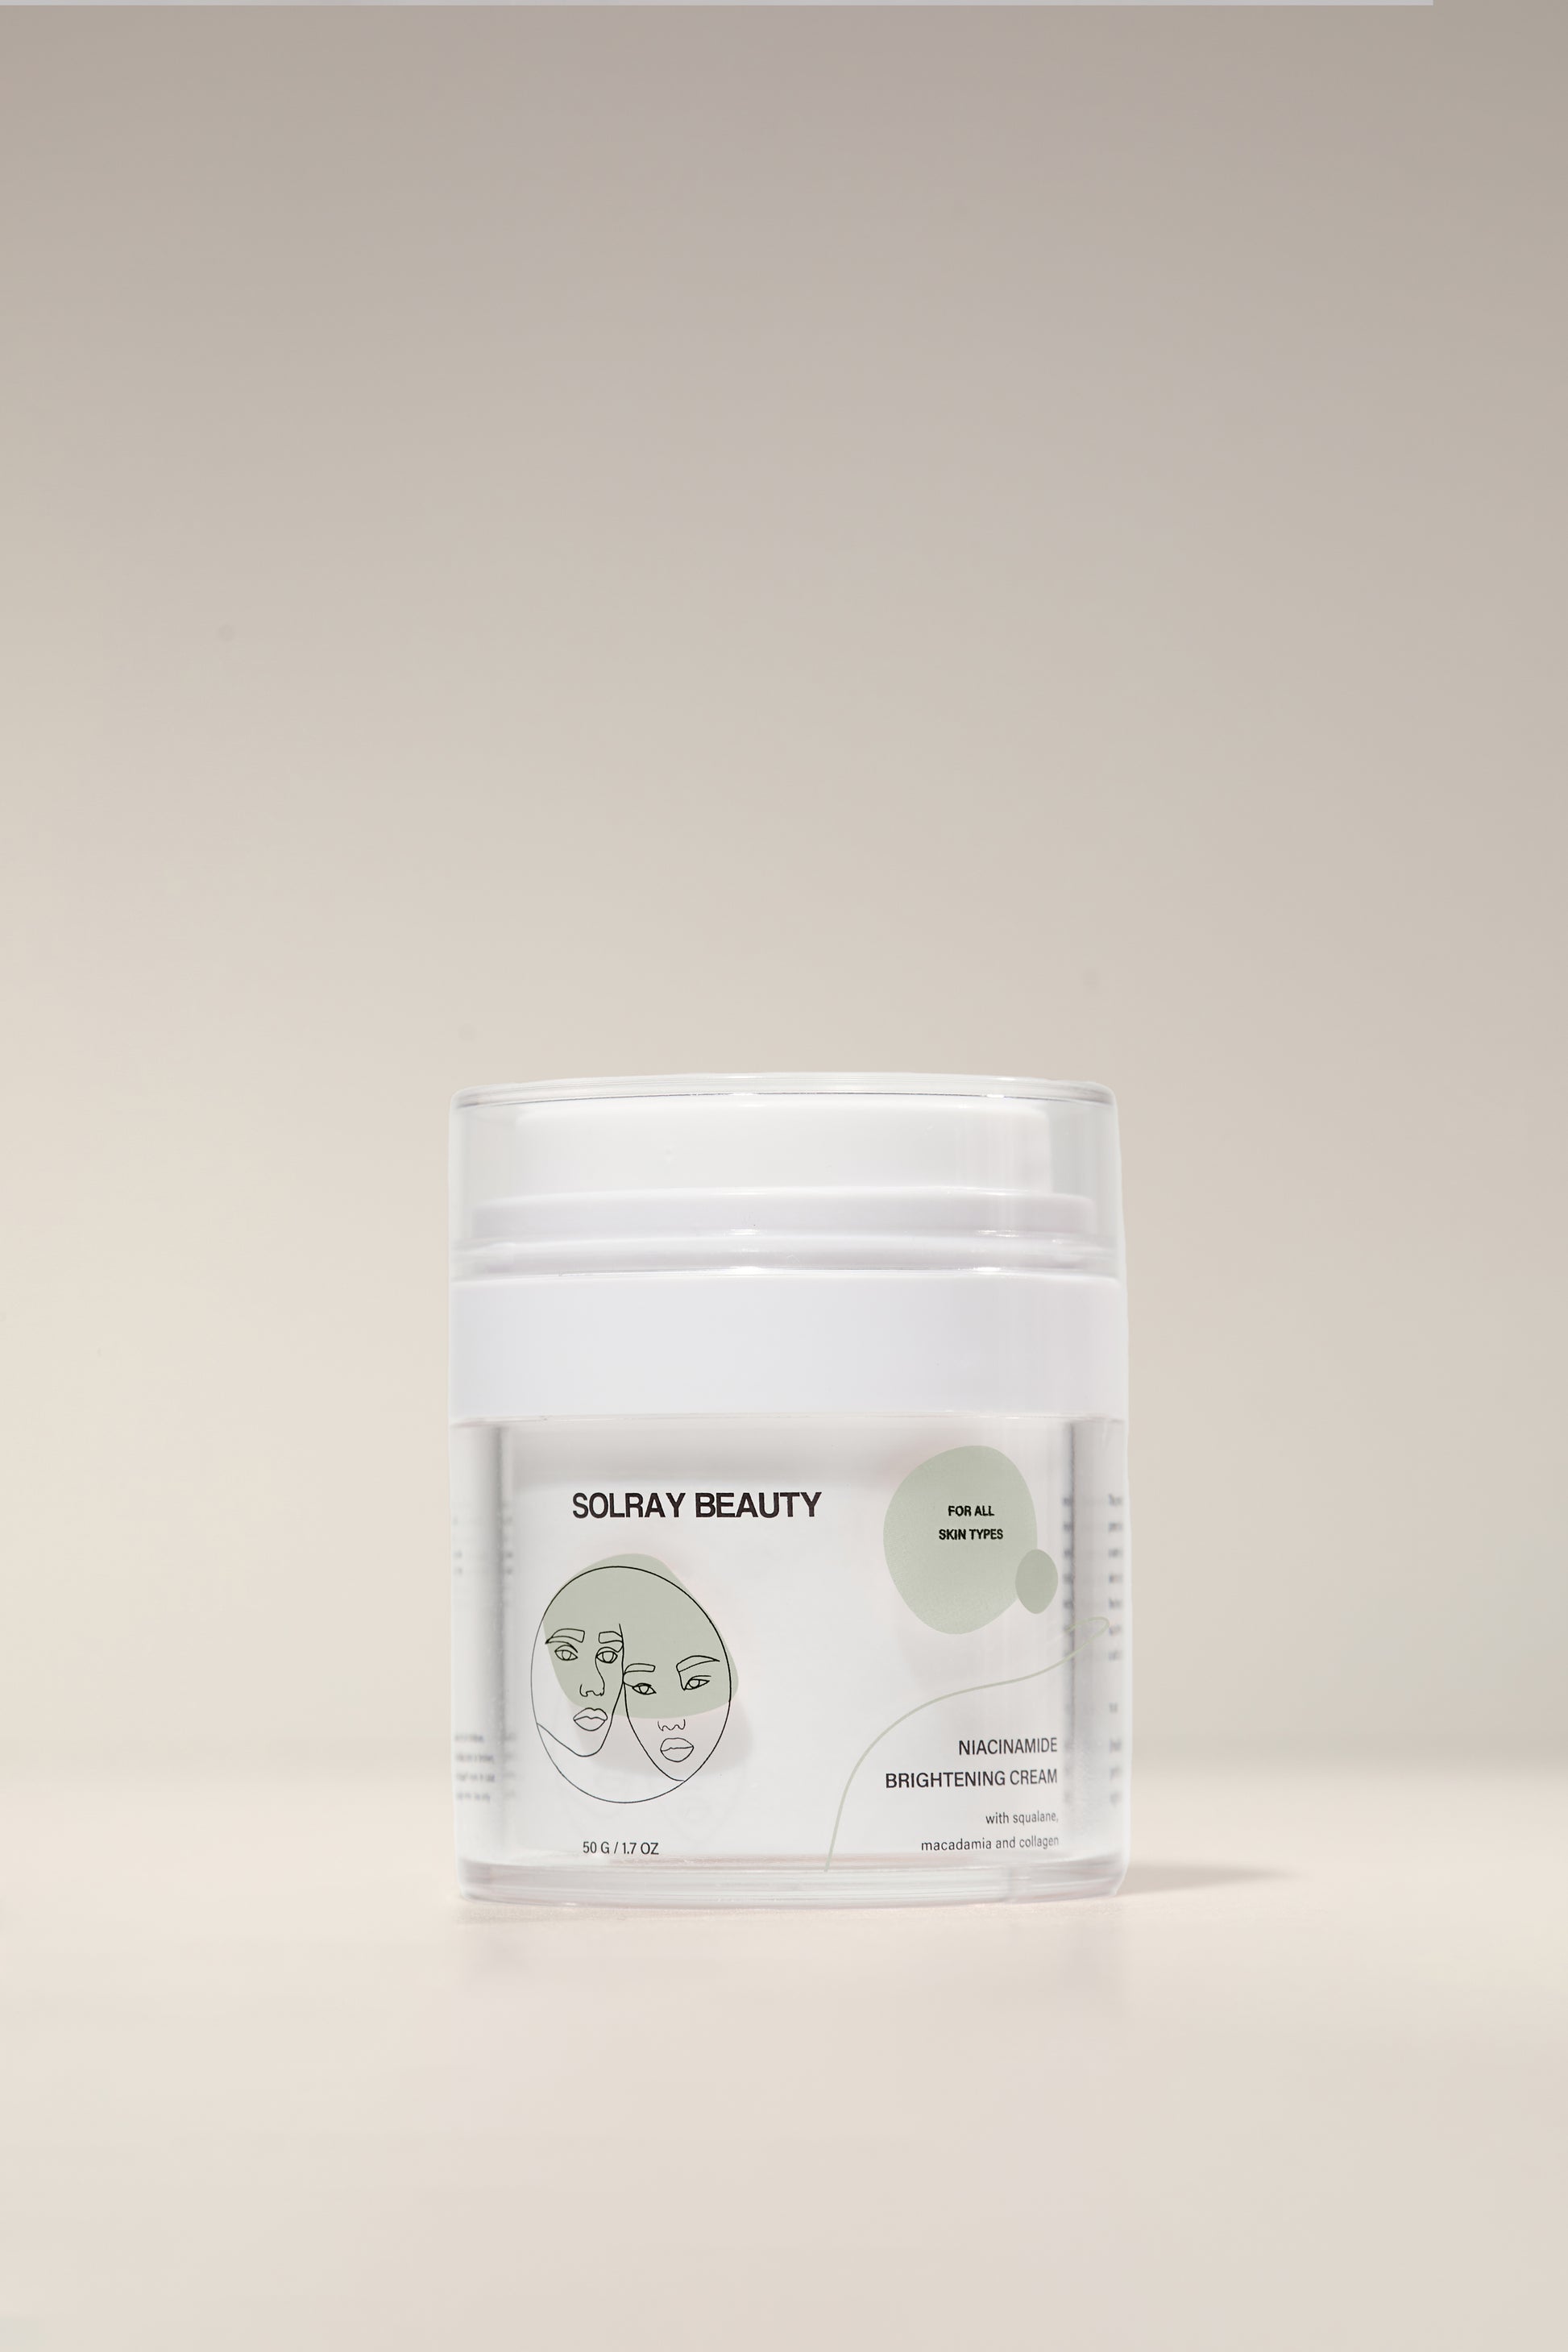 SolRay Beauty's Niacinamide Face Brightening Cream - a jar of the cream with a clear cap.